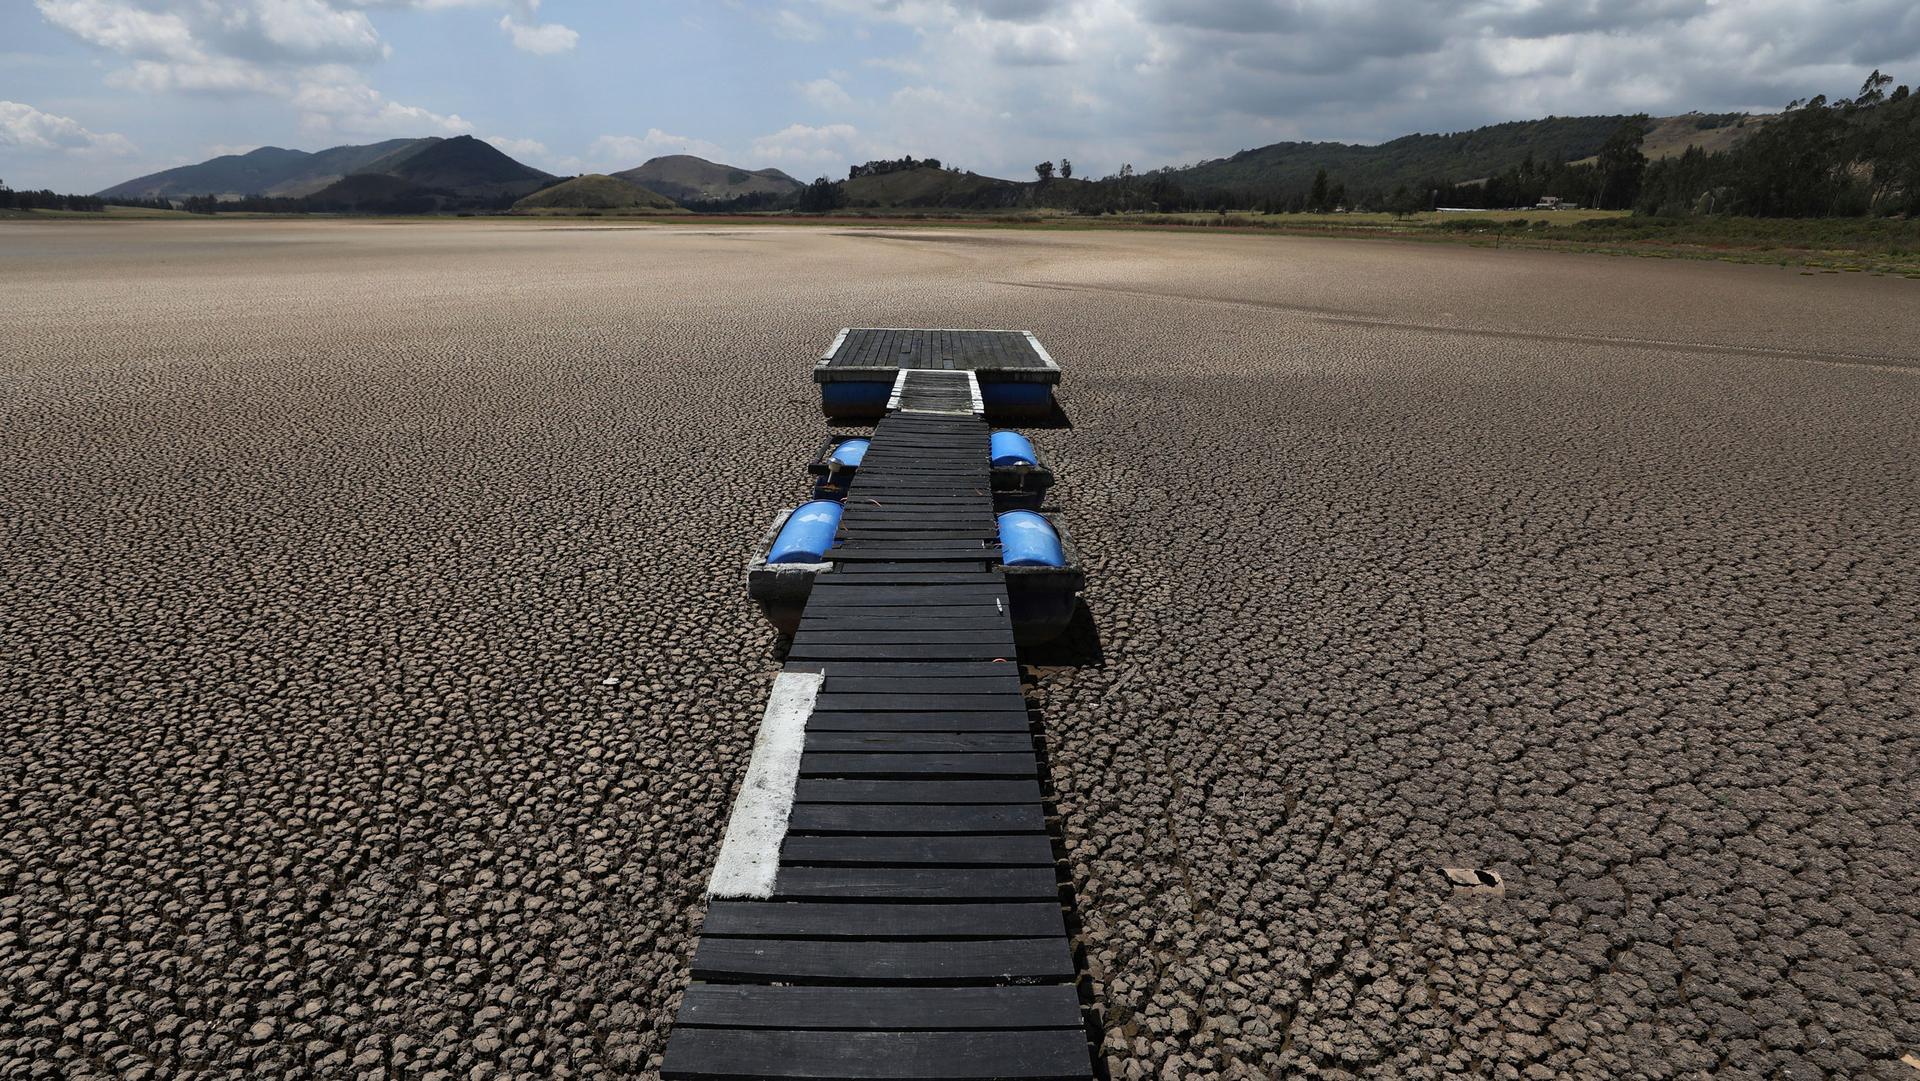 A long wooden dock is shown with blue barrels on both sides on the dry bed where a lake used to be.